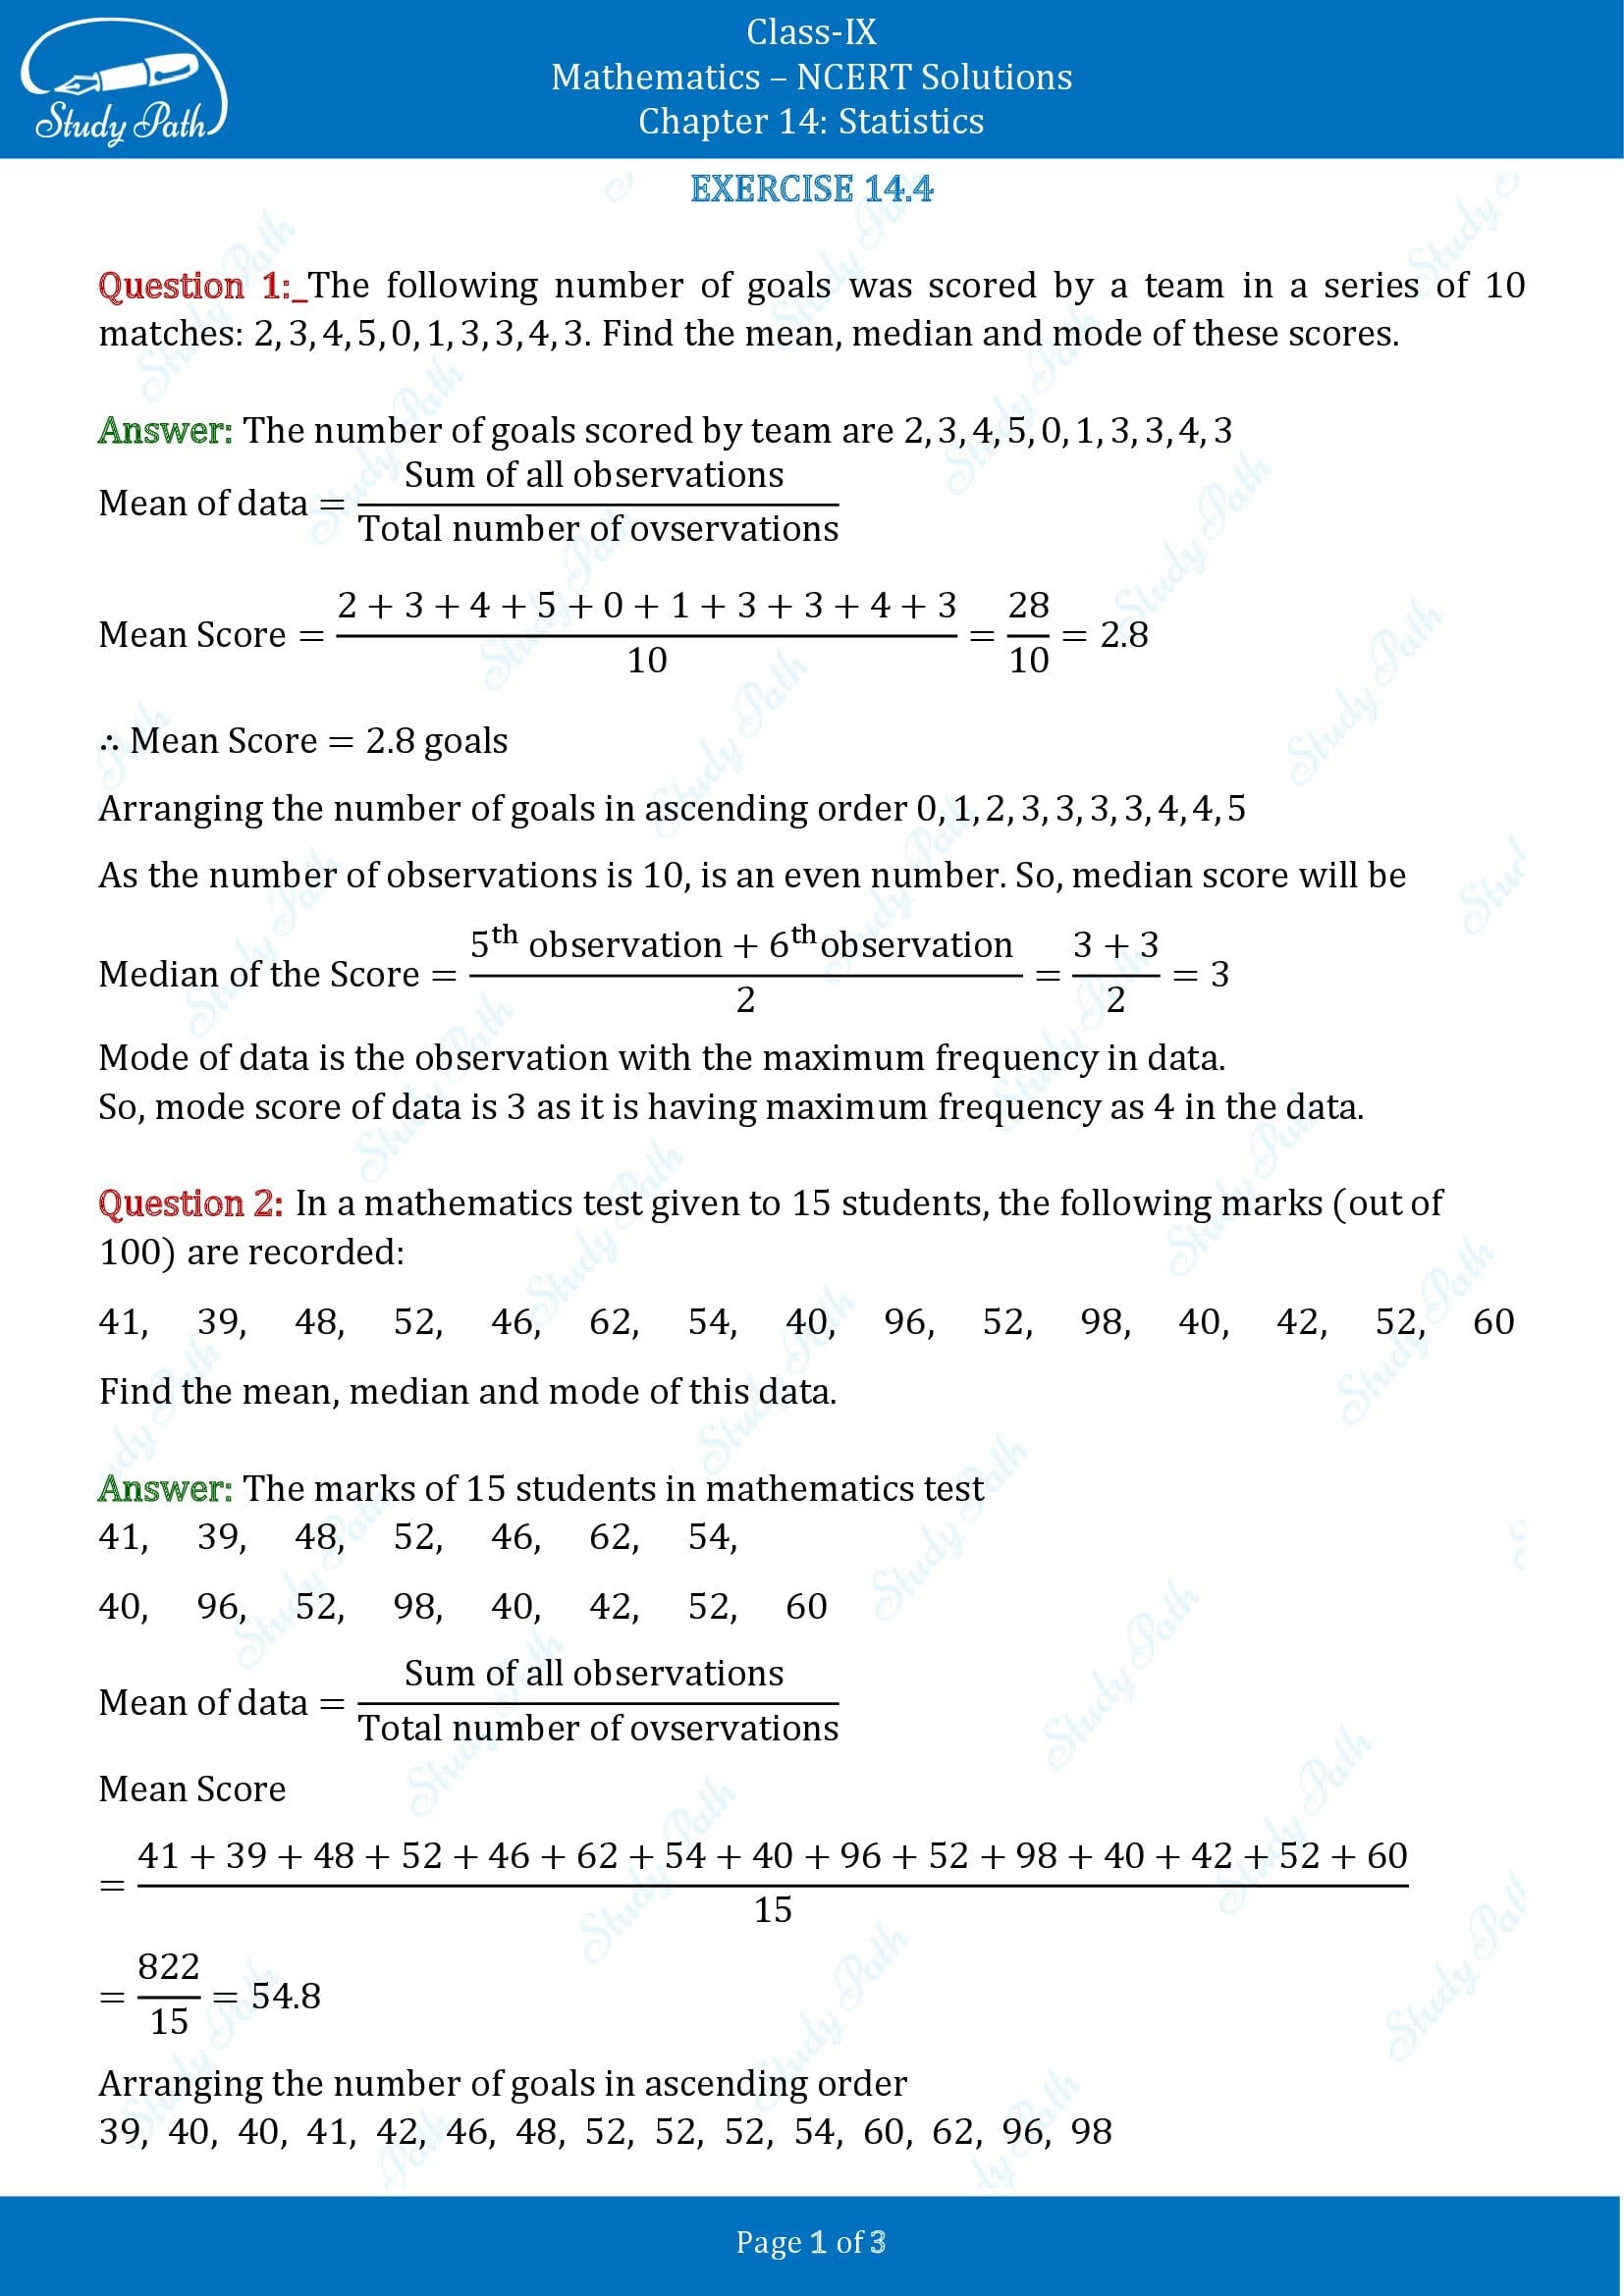 NCERT Solutions for Class 9 Maths Chapter 14 Statistics Exercise 14.4 00001